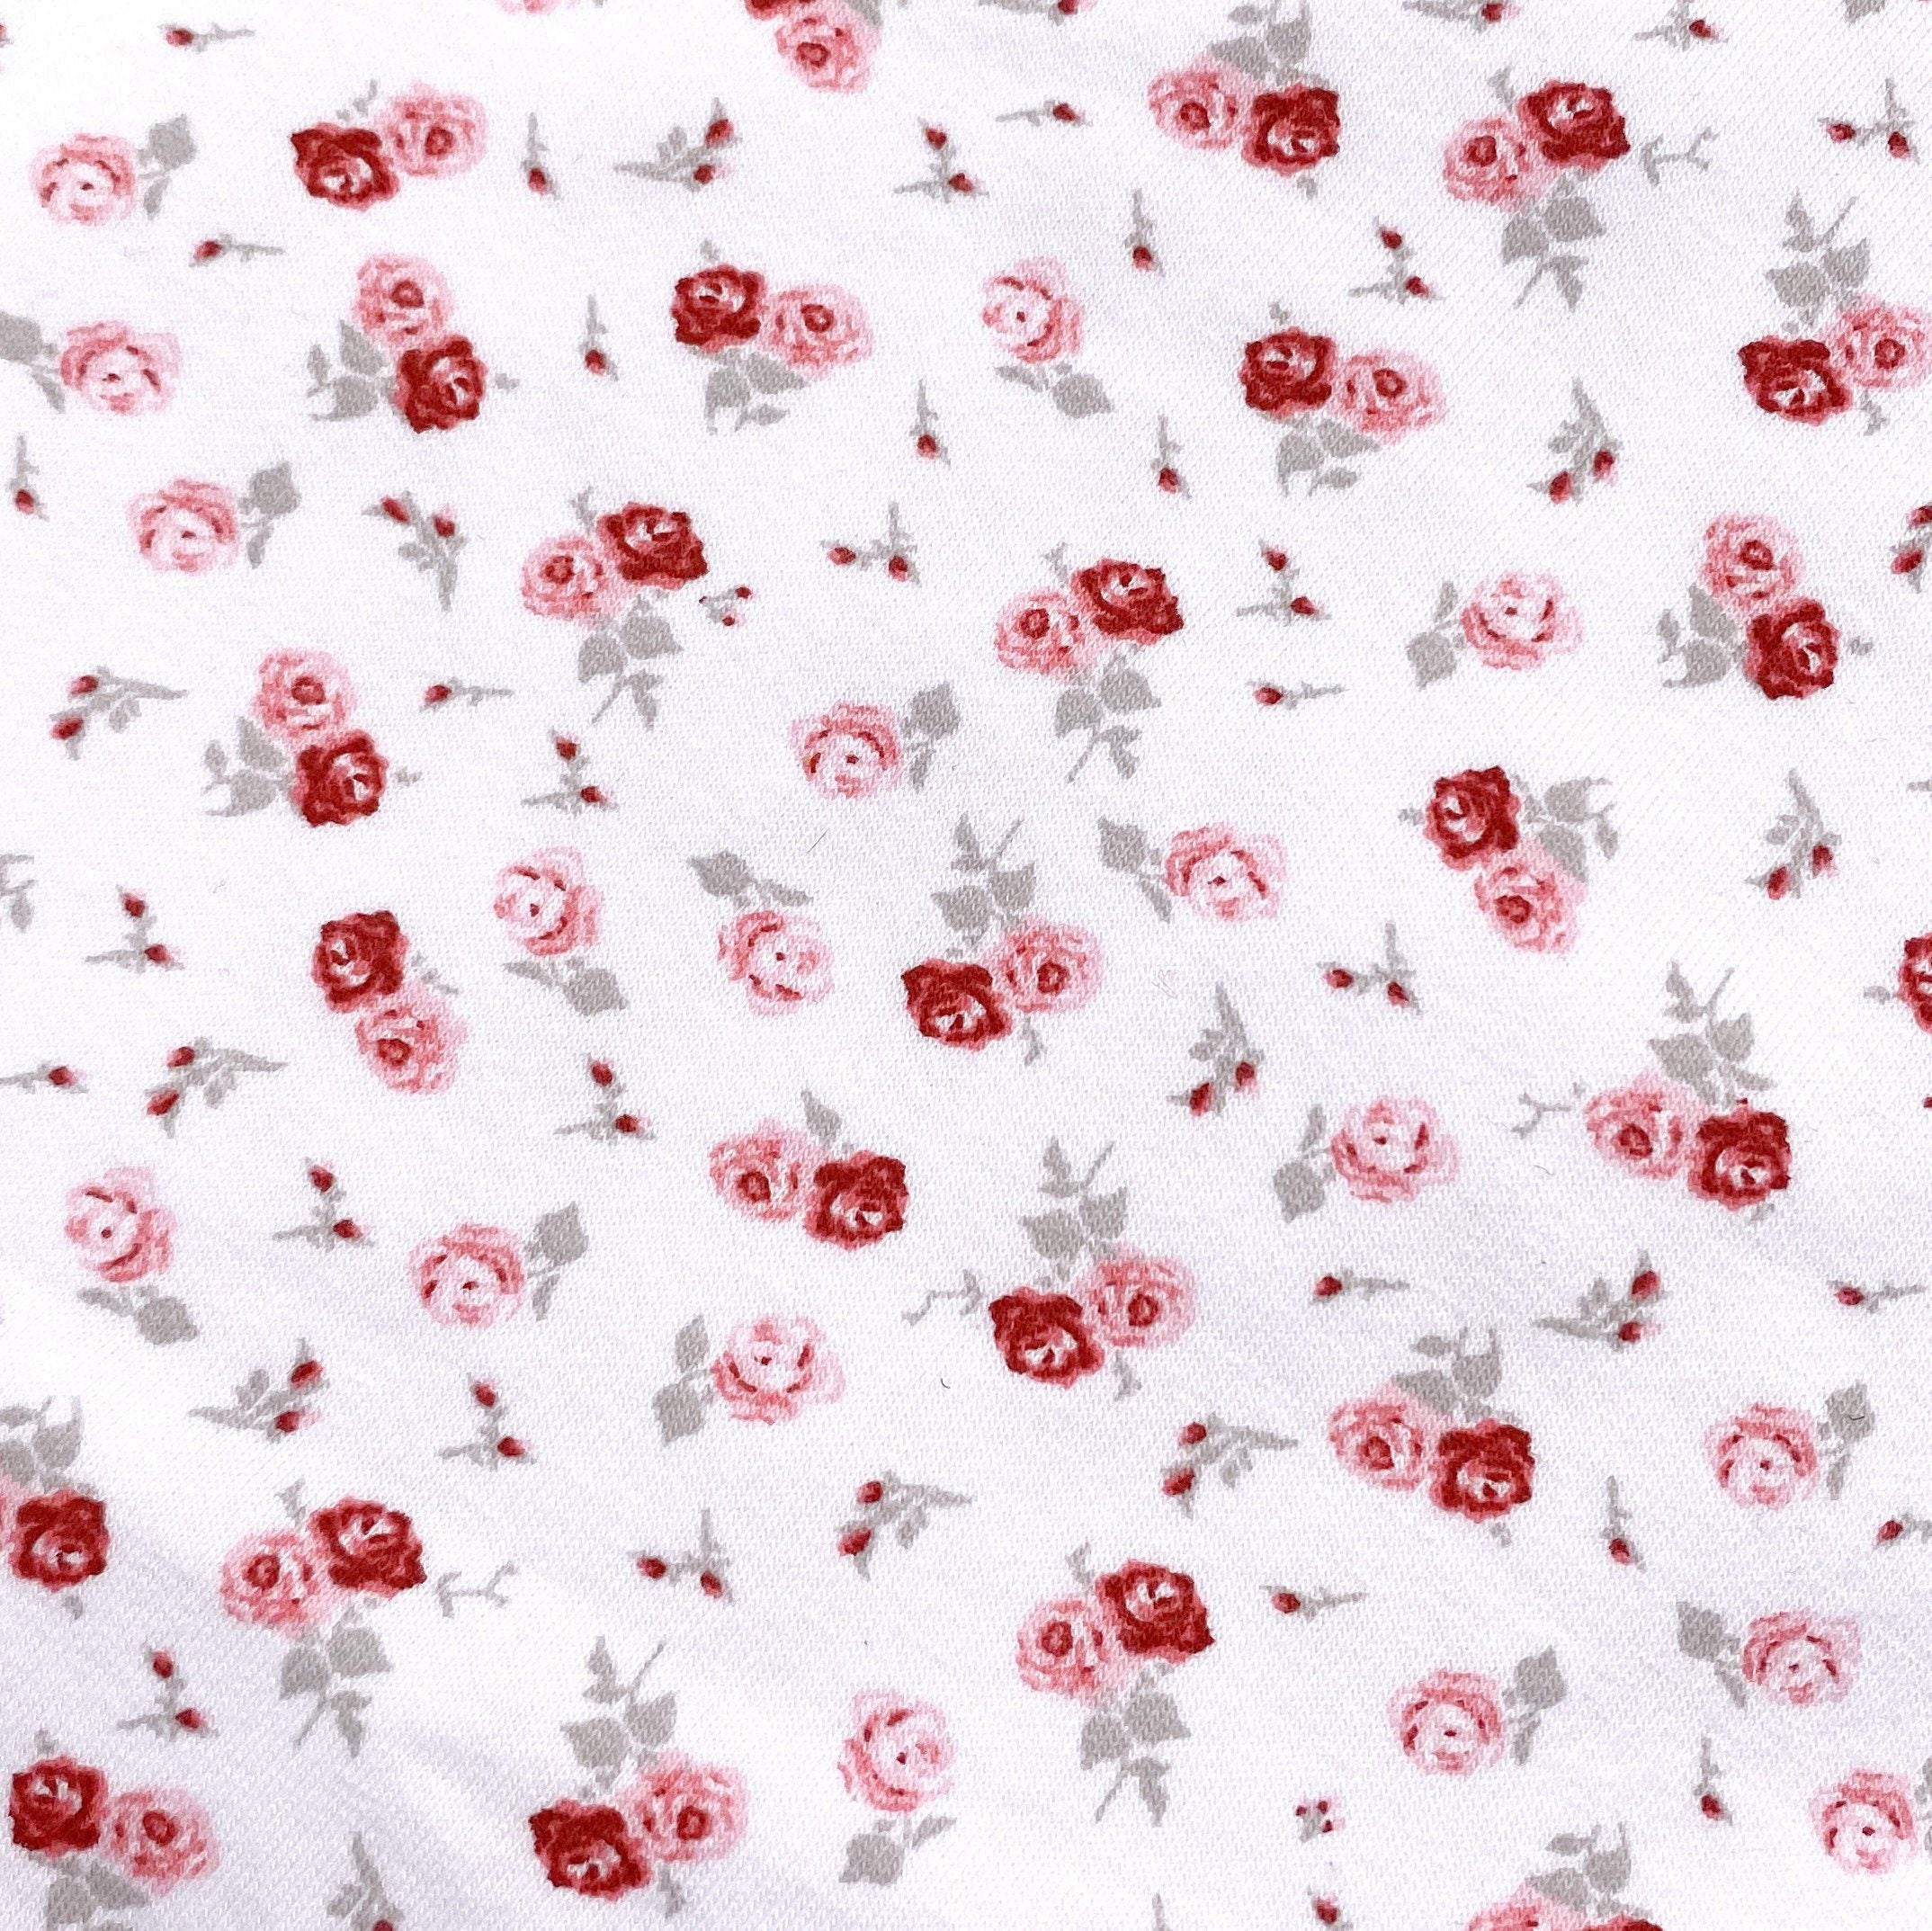 Cotton Spandex Knit Jersey Fabric, by the 1/2 Yard, Small Roses in Dark Pink or Red Print-Stitch Love Studio